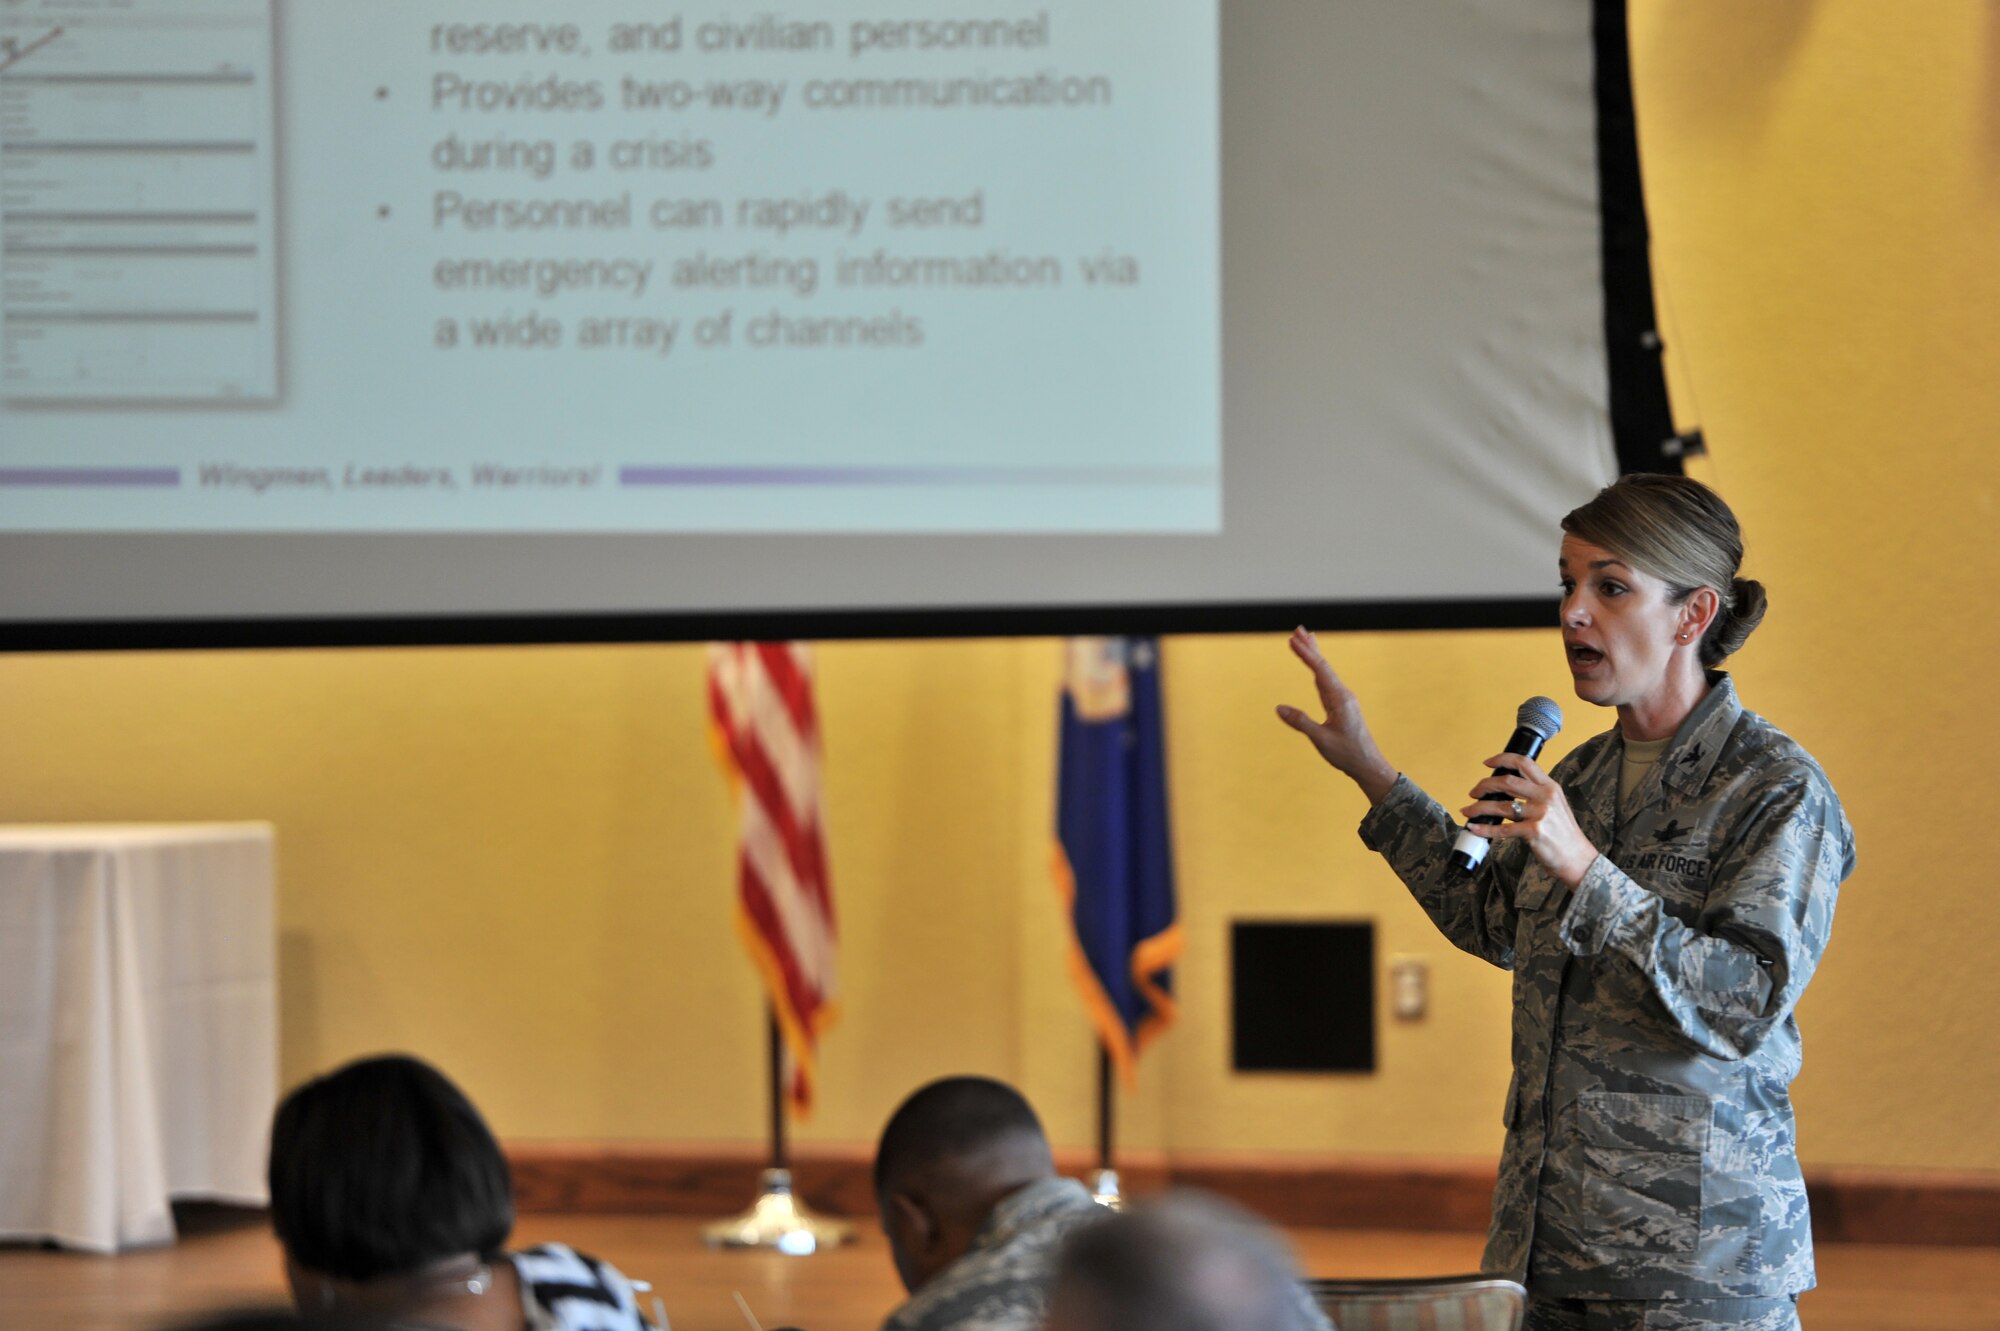 Col. Michele Edmondson, 81st Training Wing commander, discusses the importance of the AtHoc Emergency Notification System at a town hall forum in the Bay Breeze Event Center ballroom, May 3, 2016, Keesler Air Force Base, Miss. Edmondson hosted the forum to discuss current base events, the upcoming hurricane season and fielded a Q-and-A session with attendees. (U.S. Air Force photo by Senior Airman Duncan McElroy)